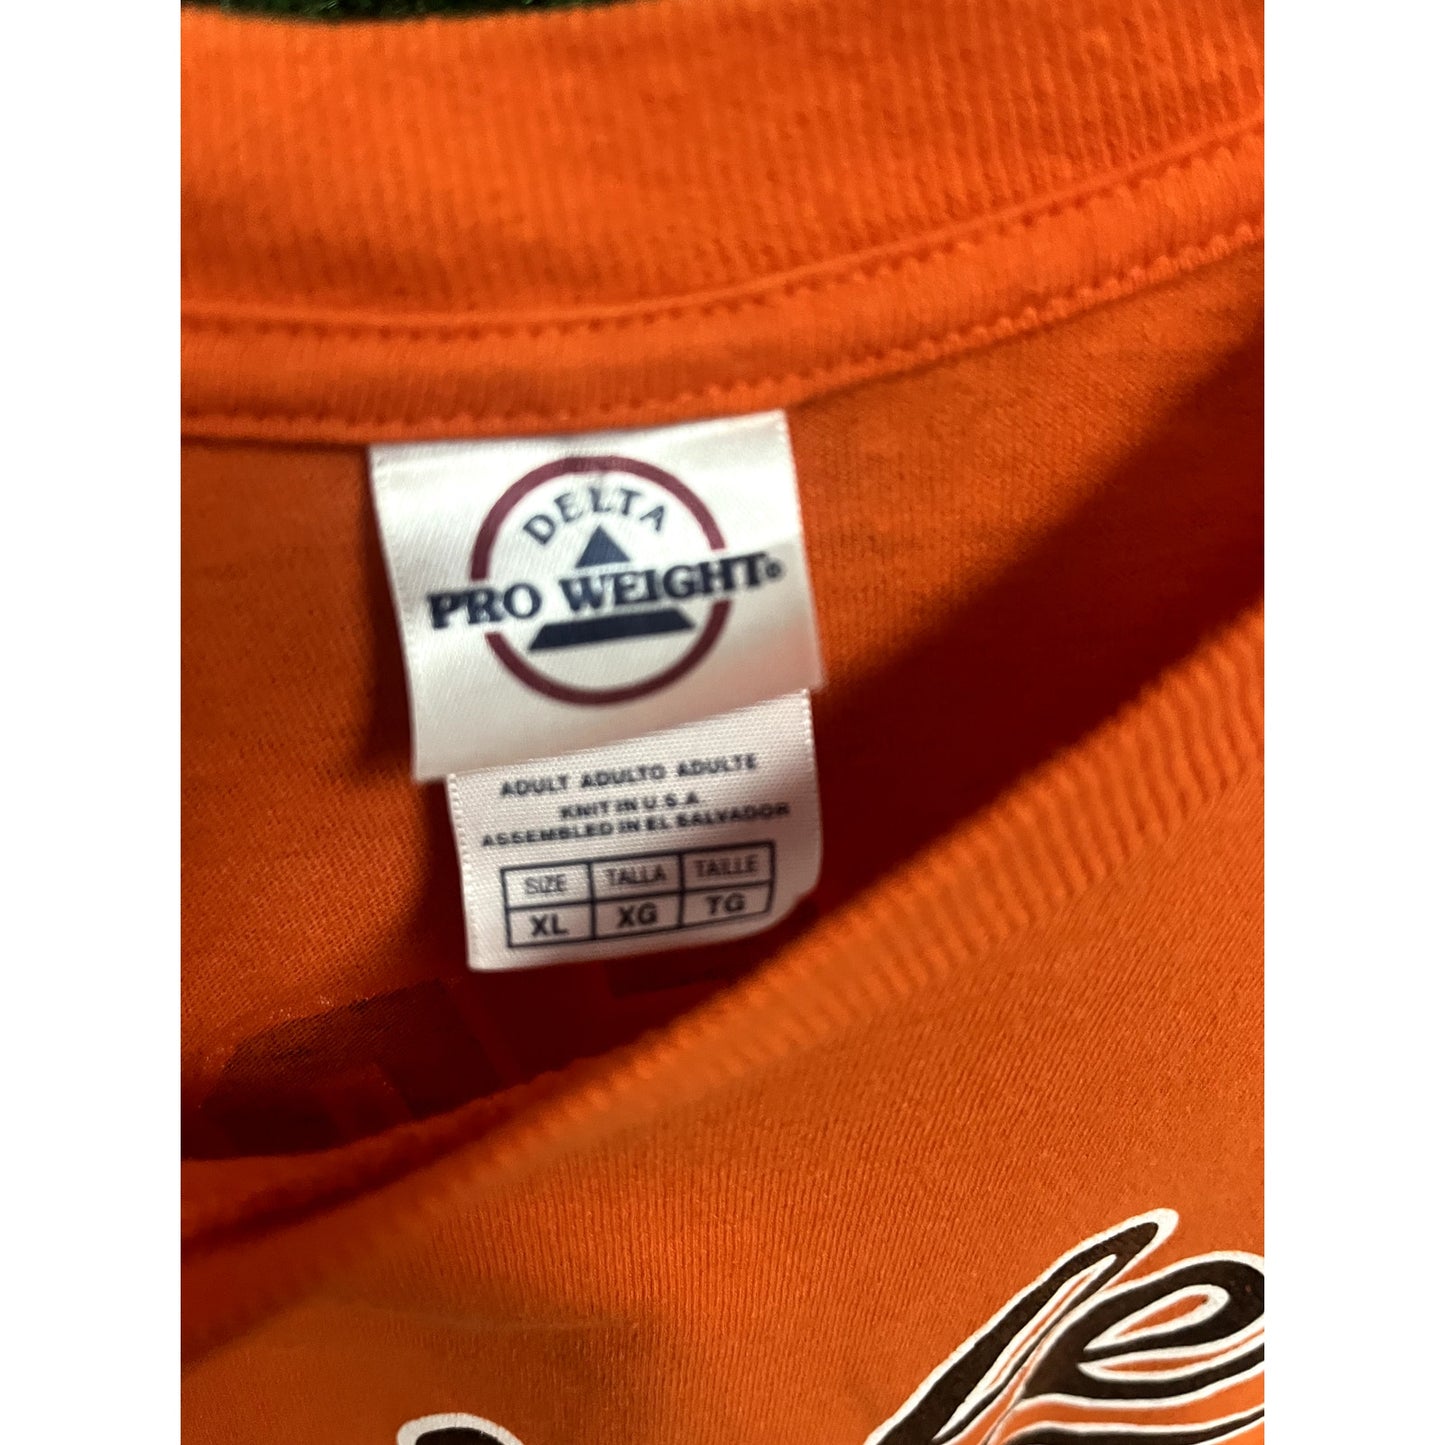 Y2K Baltimore Orioles Brian Roberts MLB Jersey T-Shirt Size XL Unisex Gift